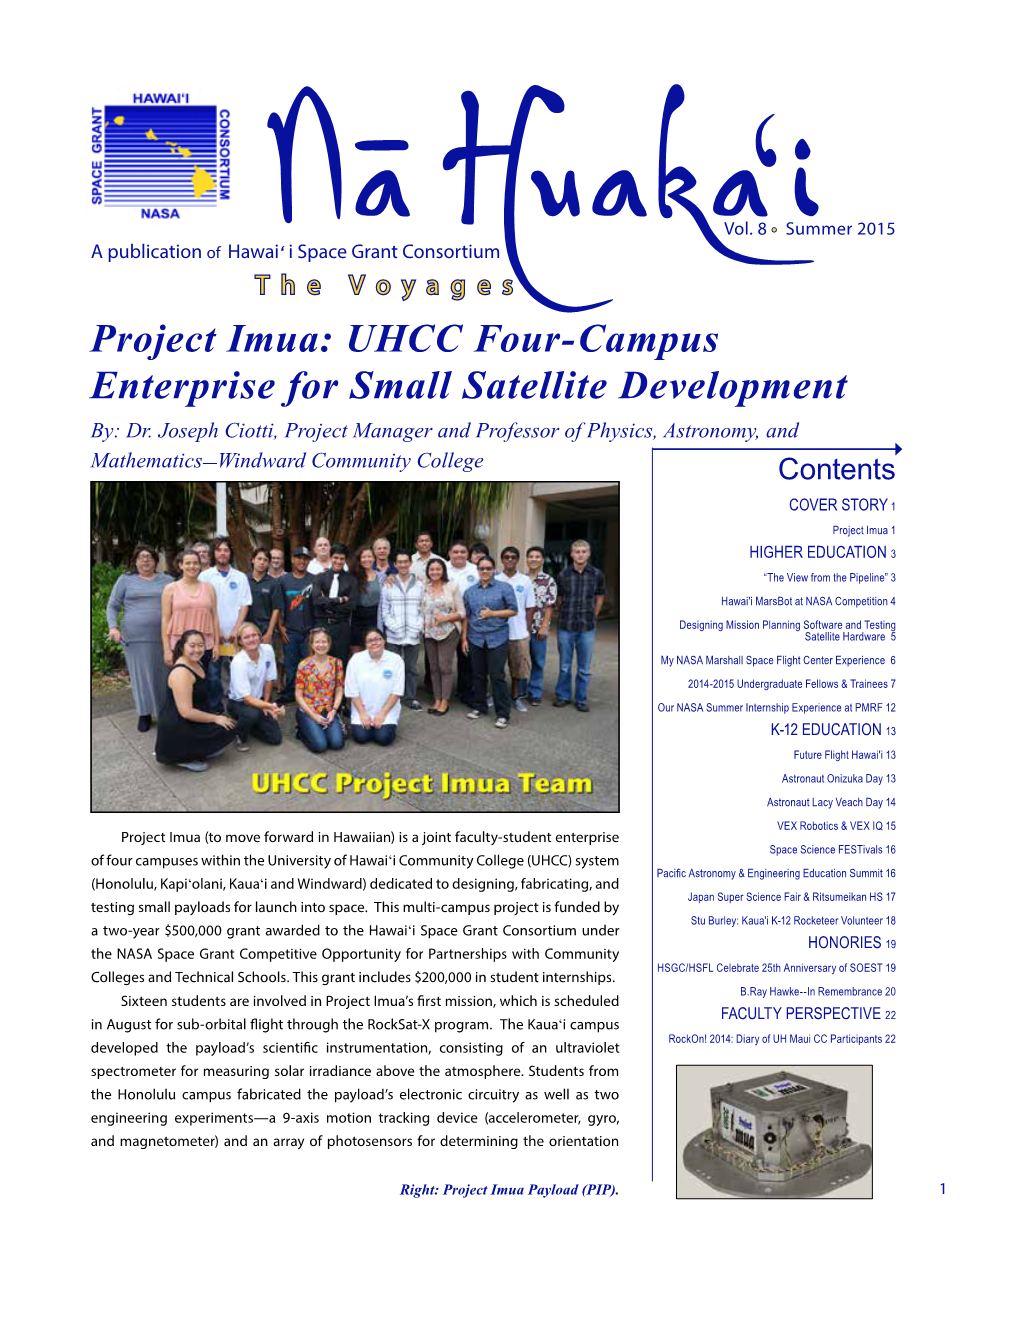 UHCC Four-Campus Enterprise for Small Satellite Development By: Dr